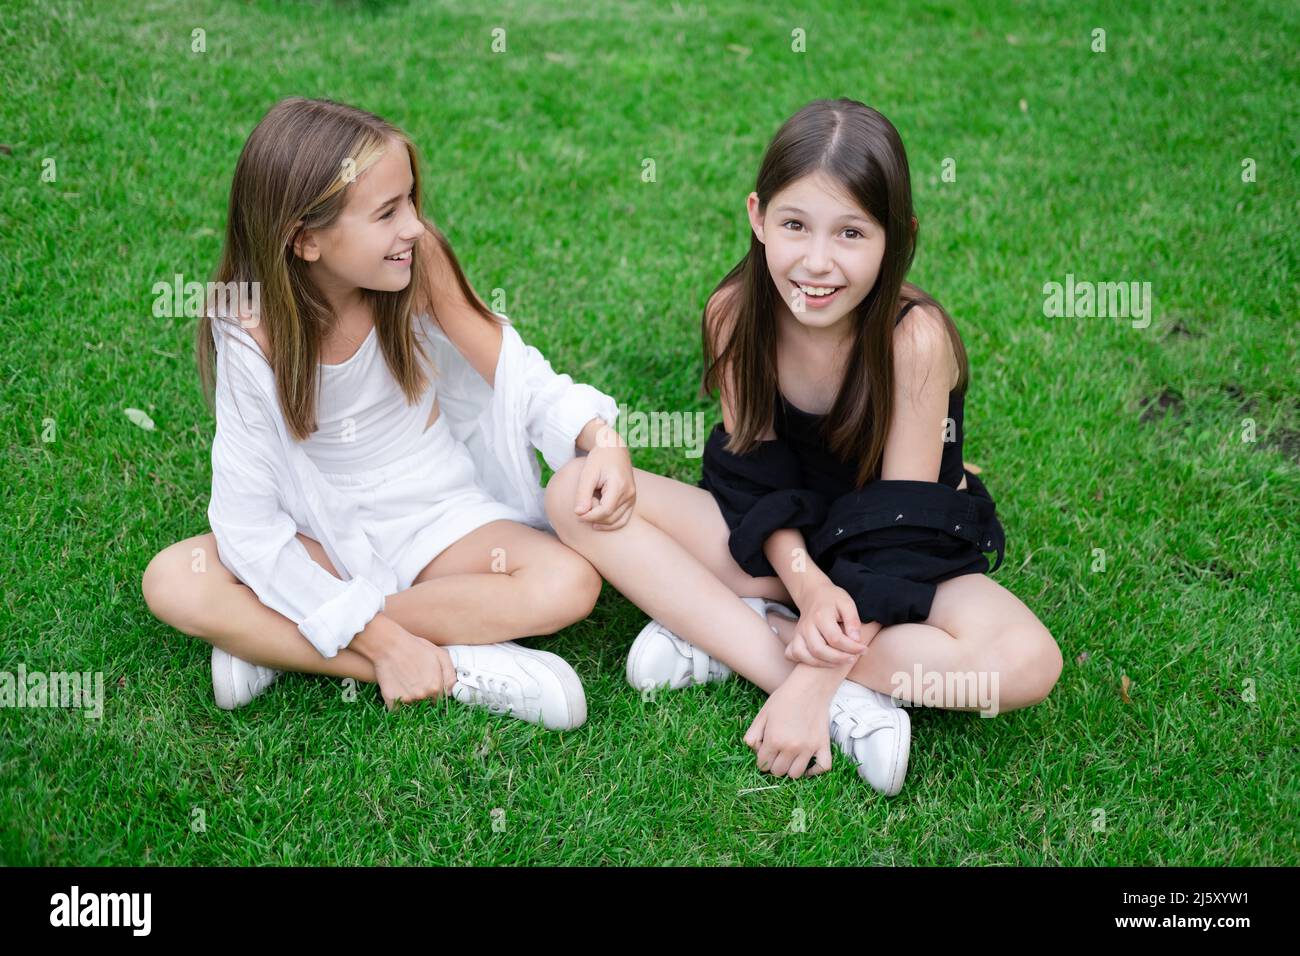 Fraternal Twins Sisters Blonde And Brunette Teen Girls In Fashionable Black And White Clothes